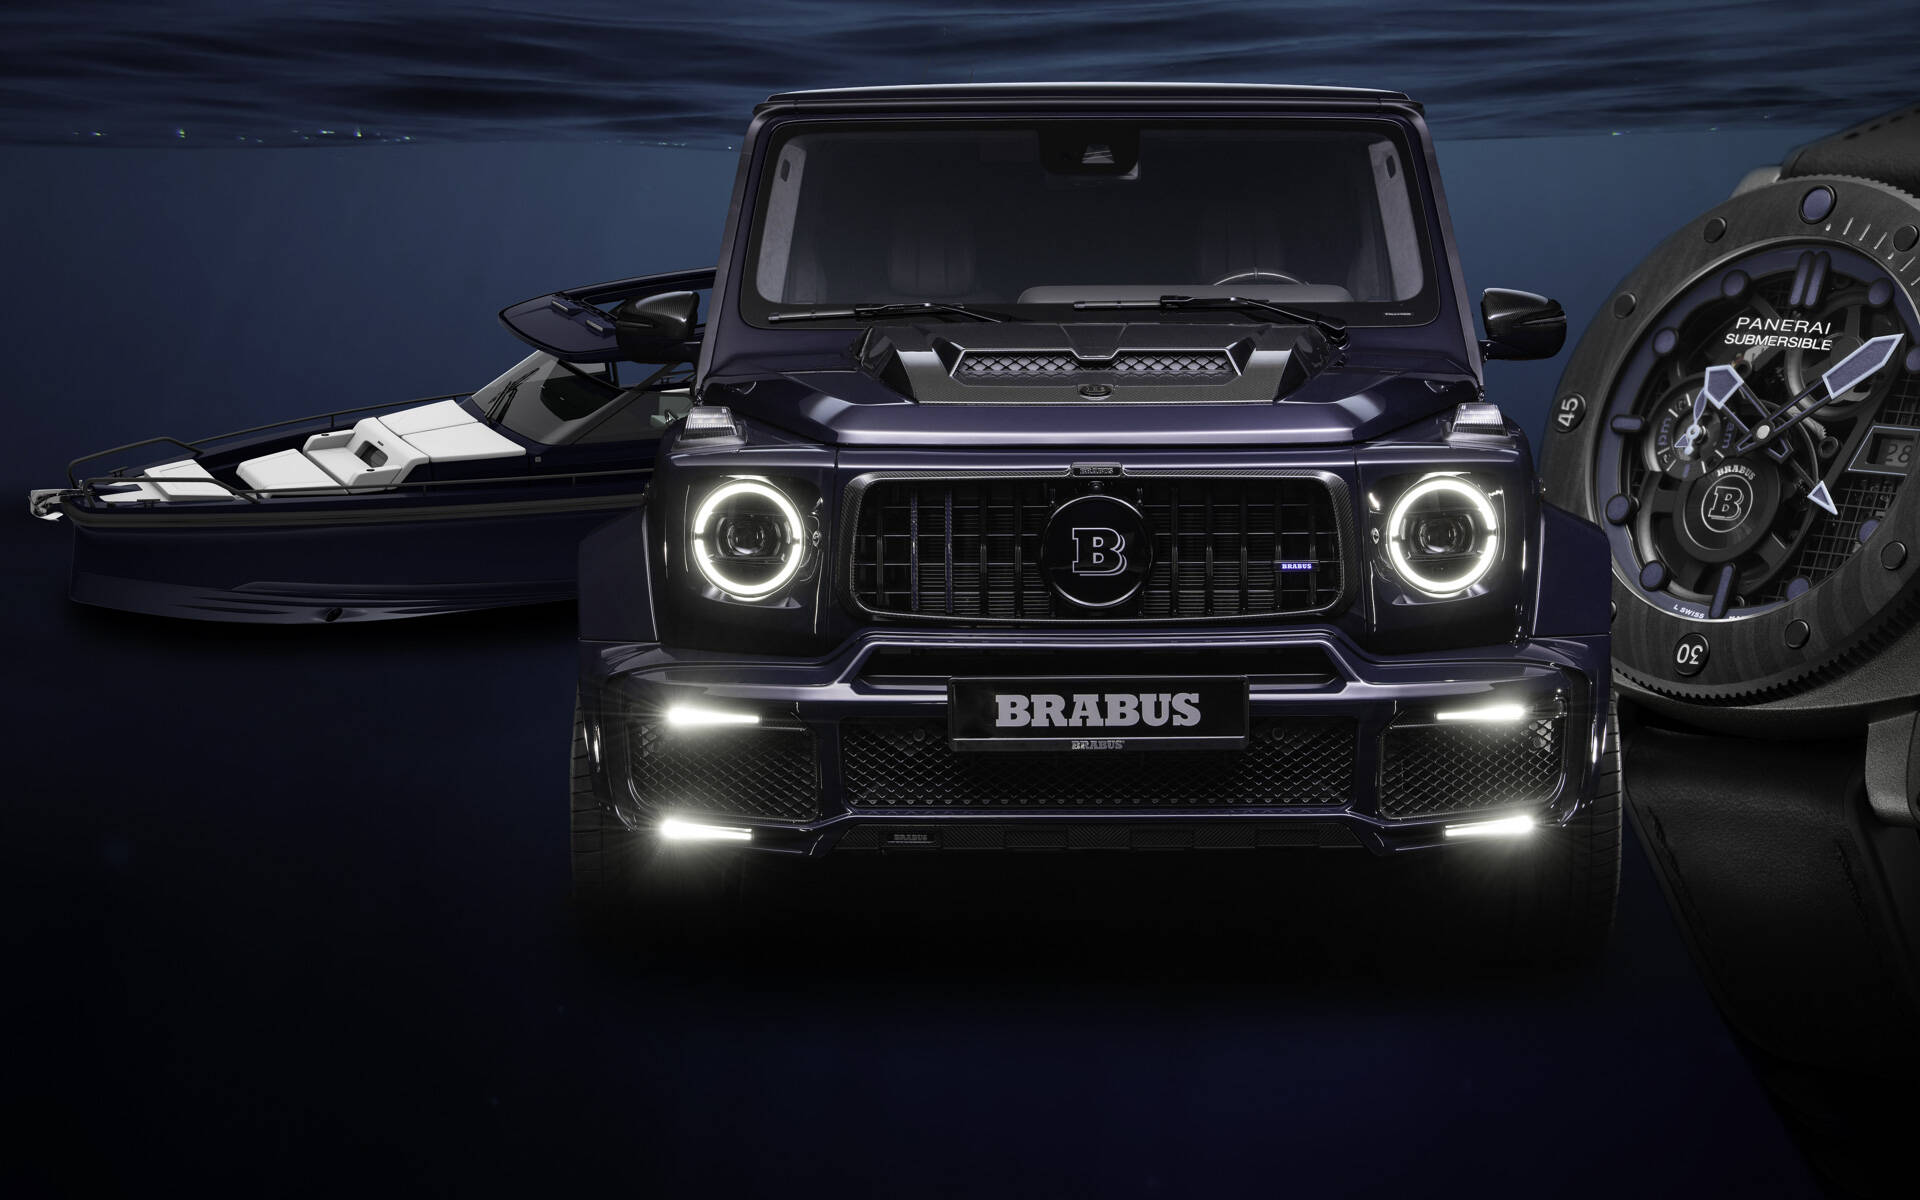 Brabus Deep Blue 900 G63 Comes With Matching Boat and Watch - The Car Guide